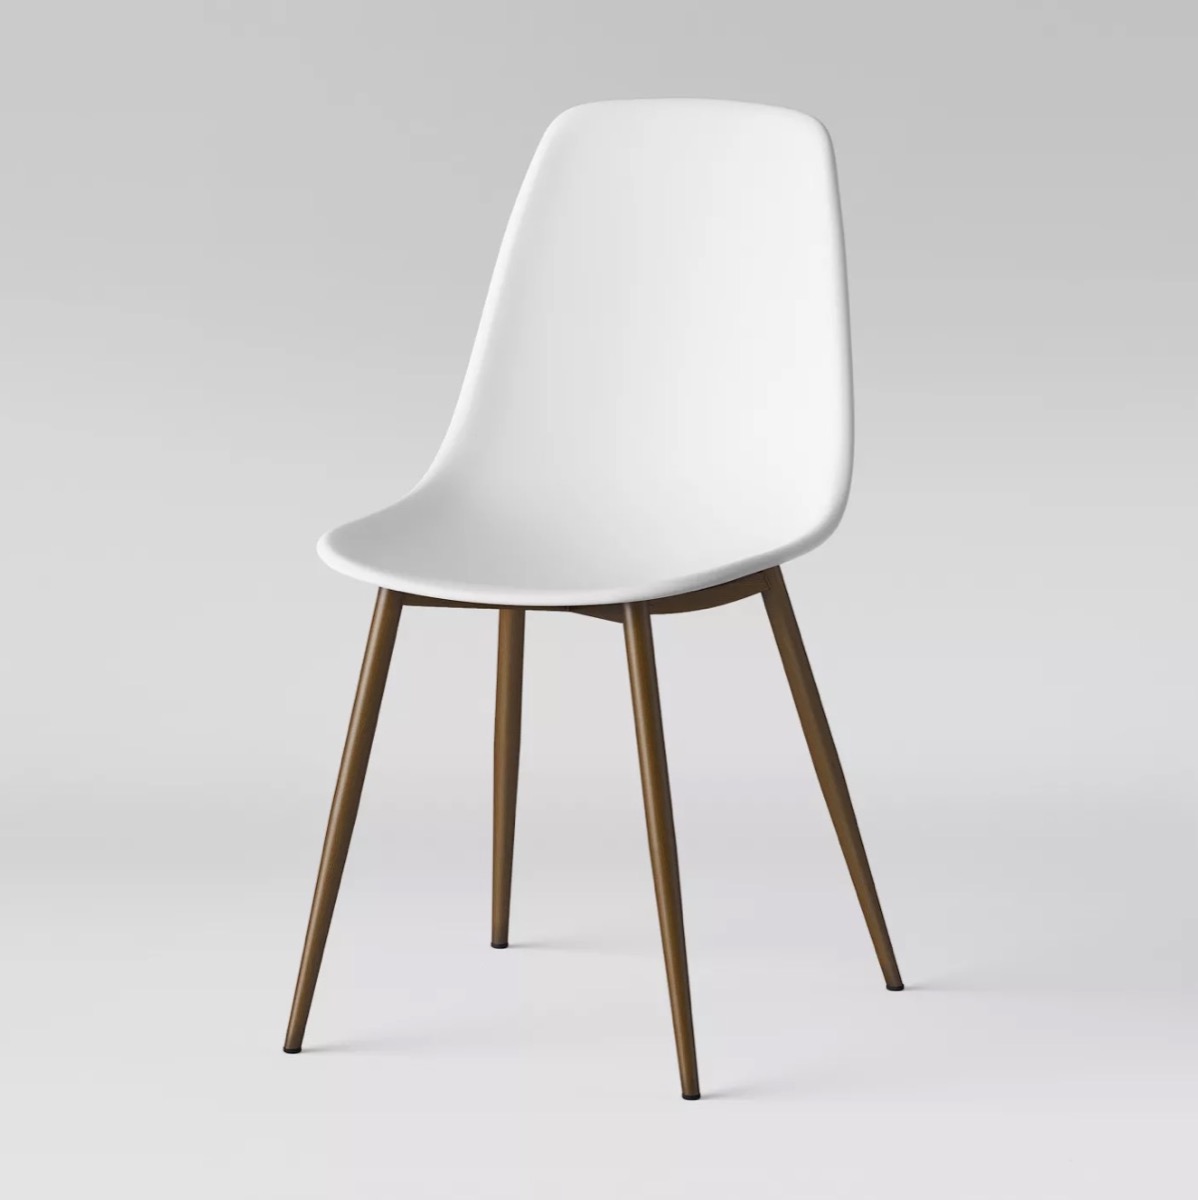 white plastic dining room chair, target home decor items